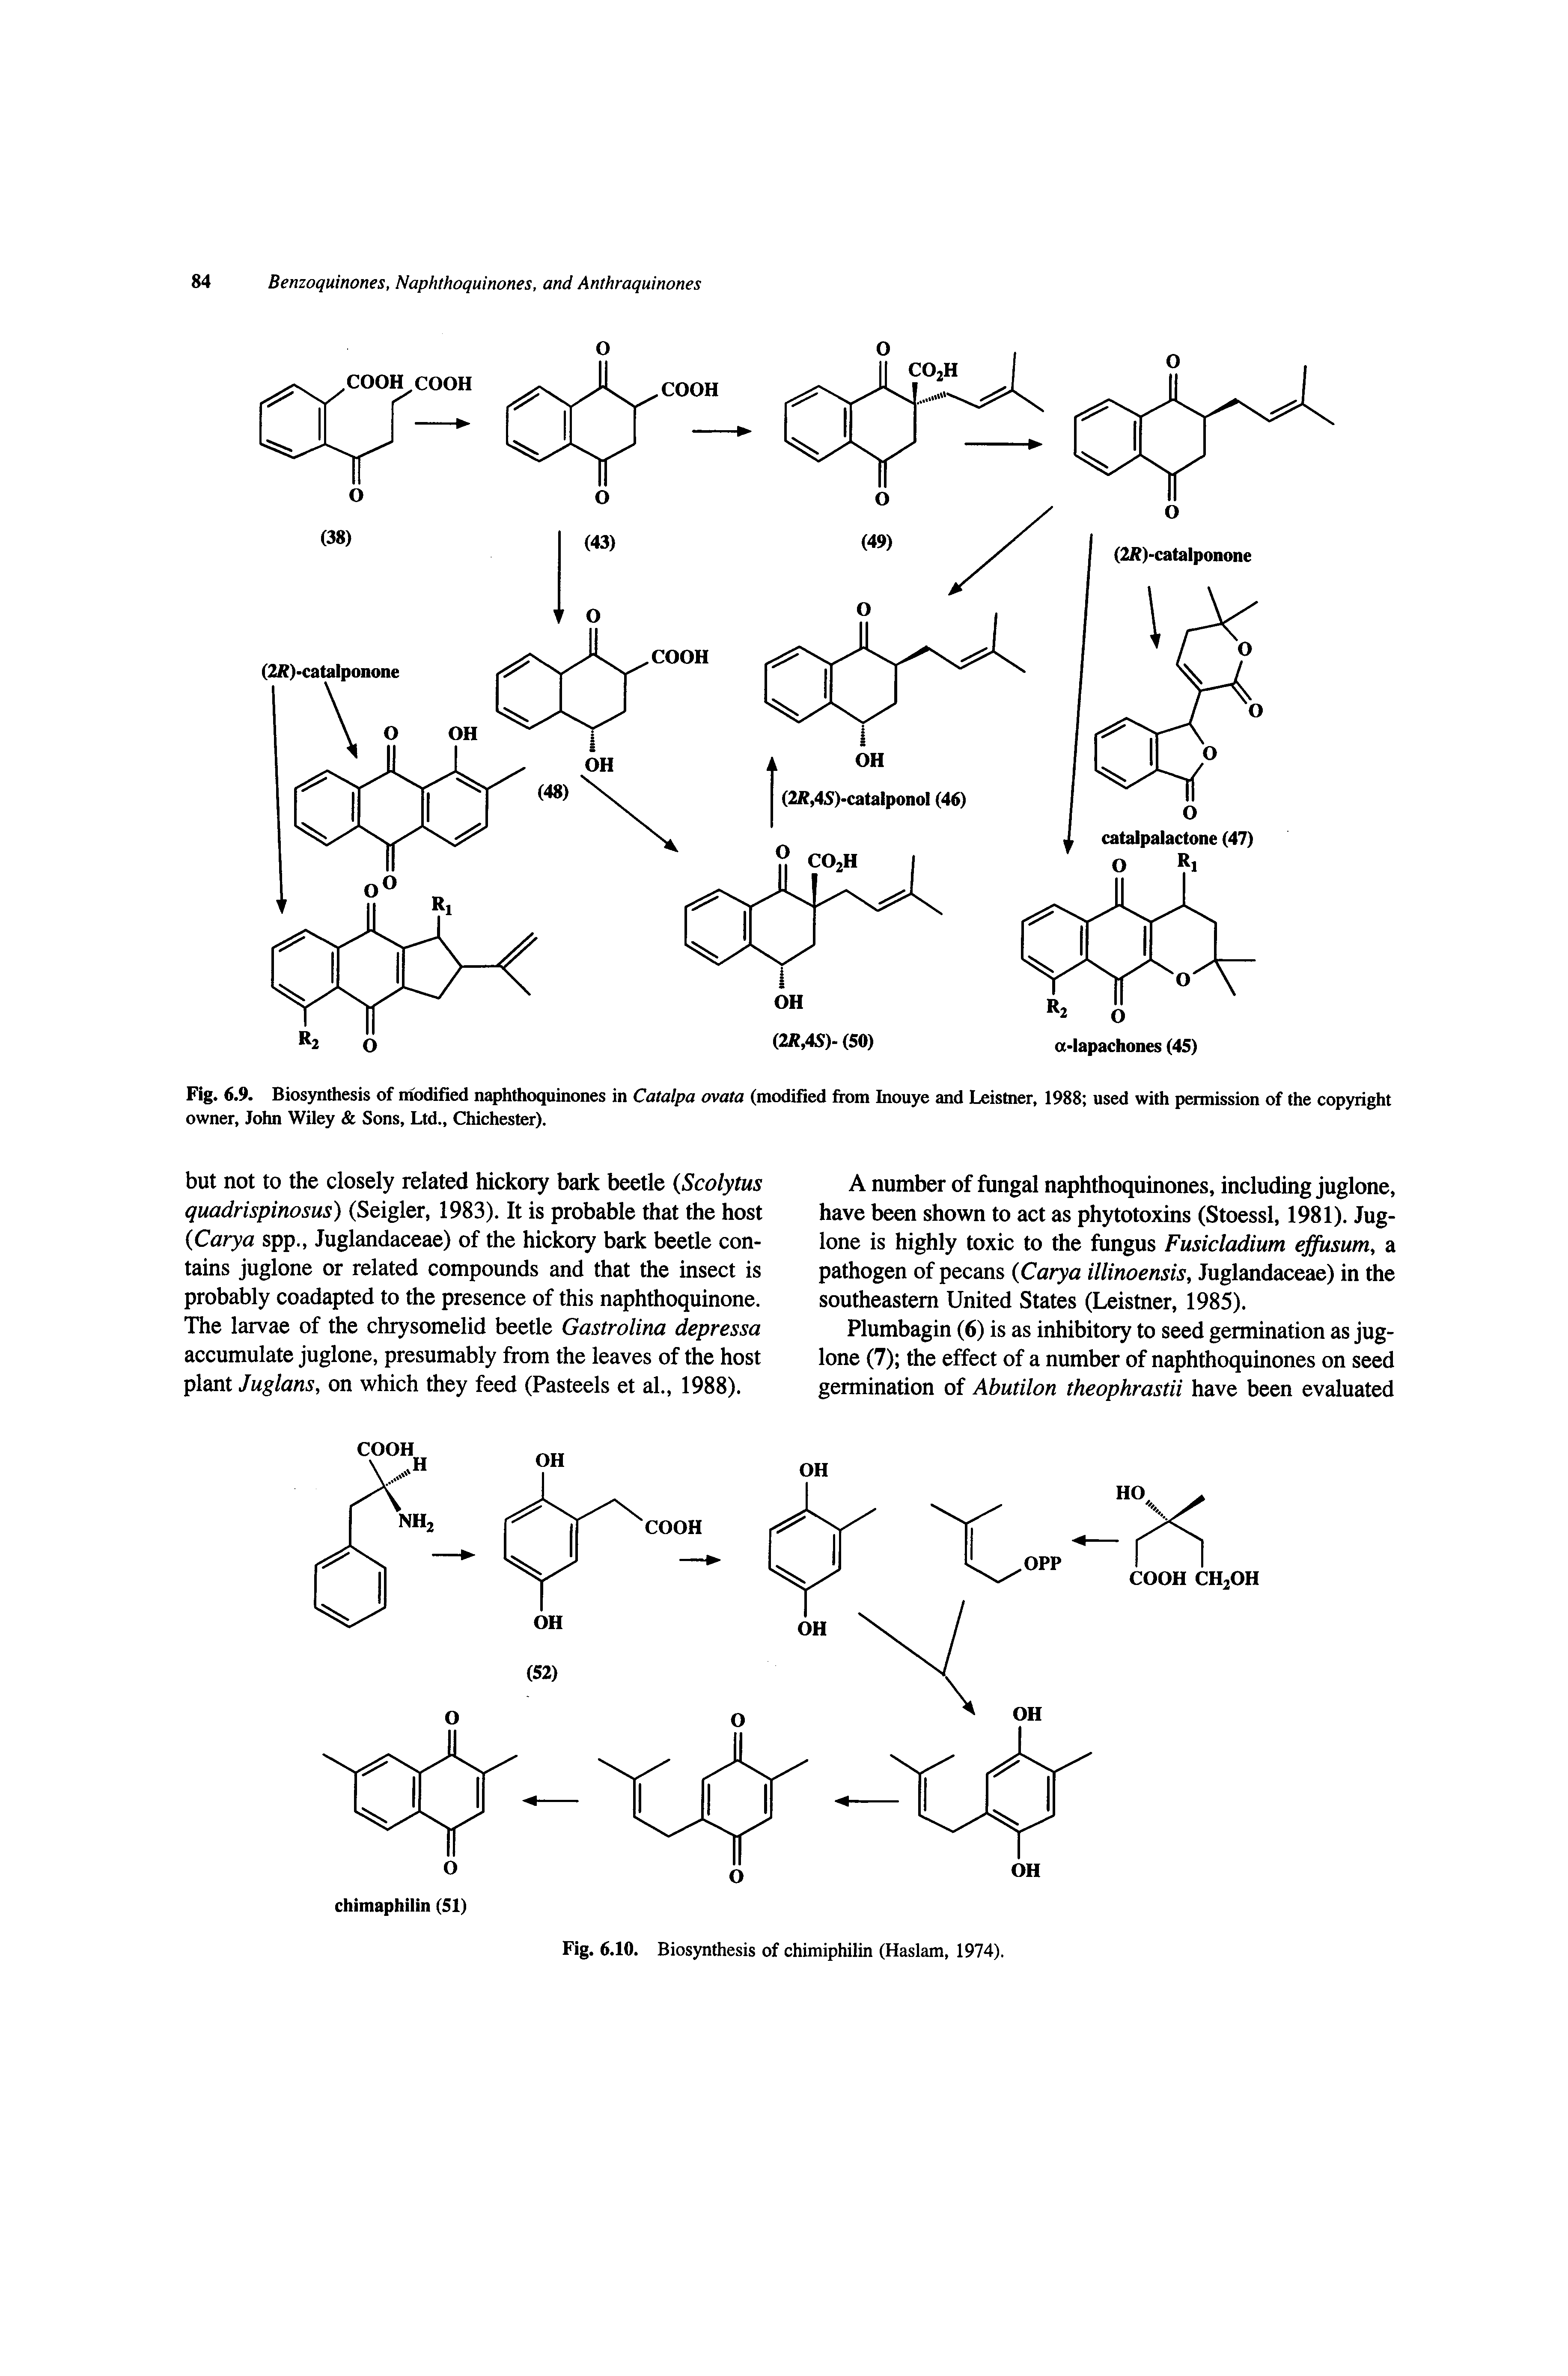 Fig. 6.9. Biosynthesis of niodified naphthoquinones in Catalpa ovata (modified from Inouye and Leistner, 1988 used with pennission of the copyright owner, John Wiley Sons, Ltd., Chichester).